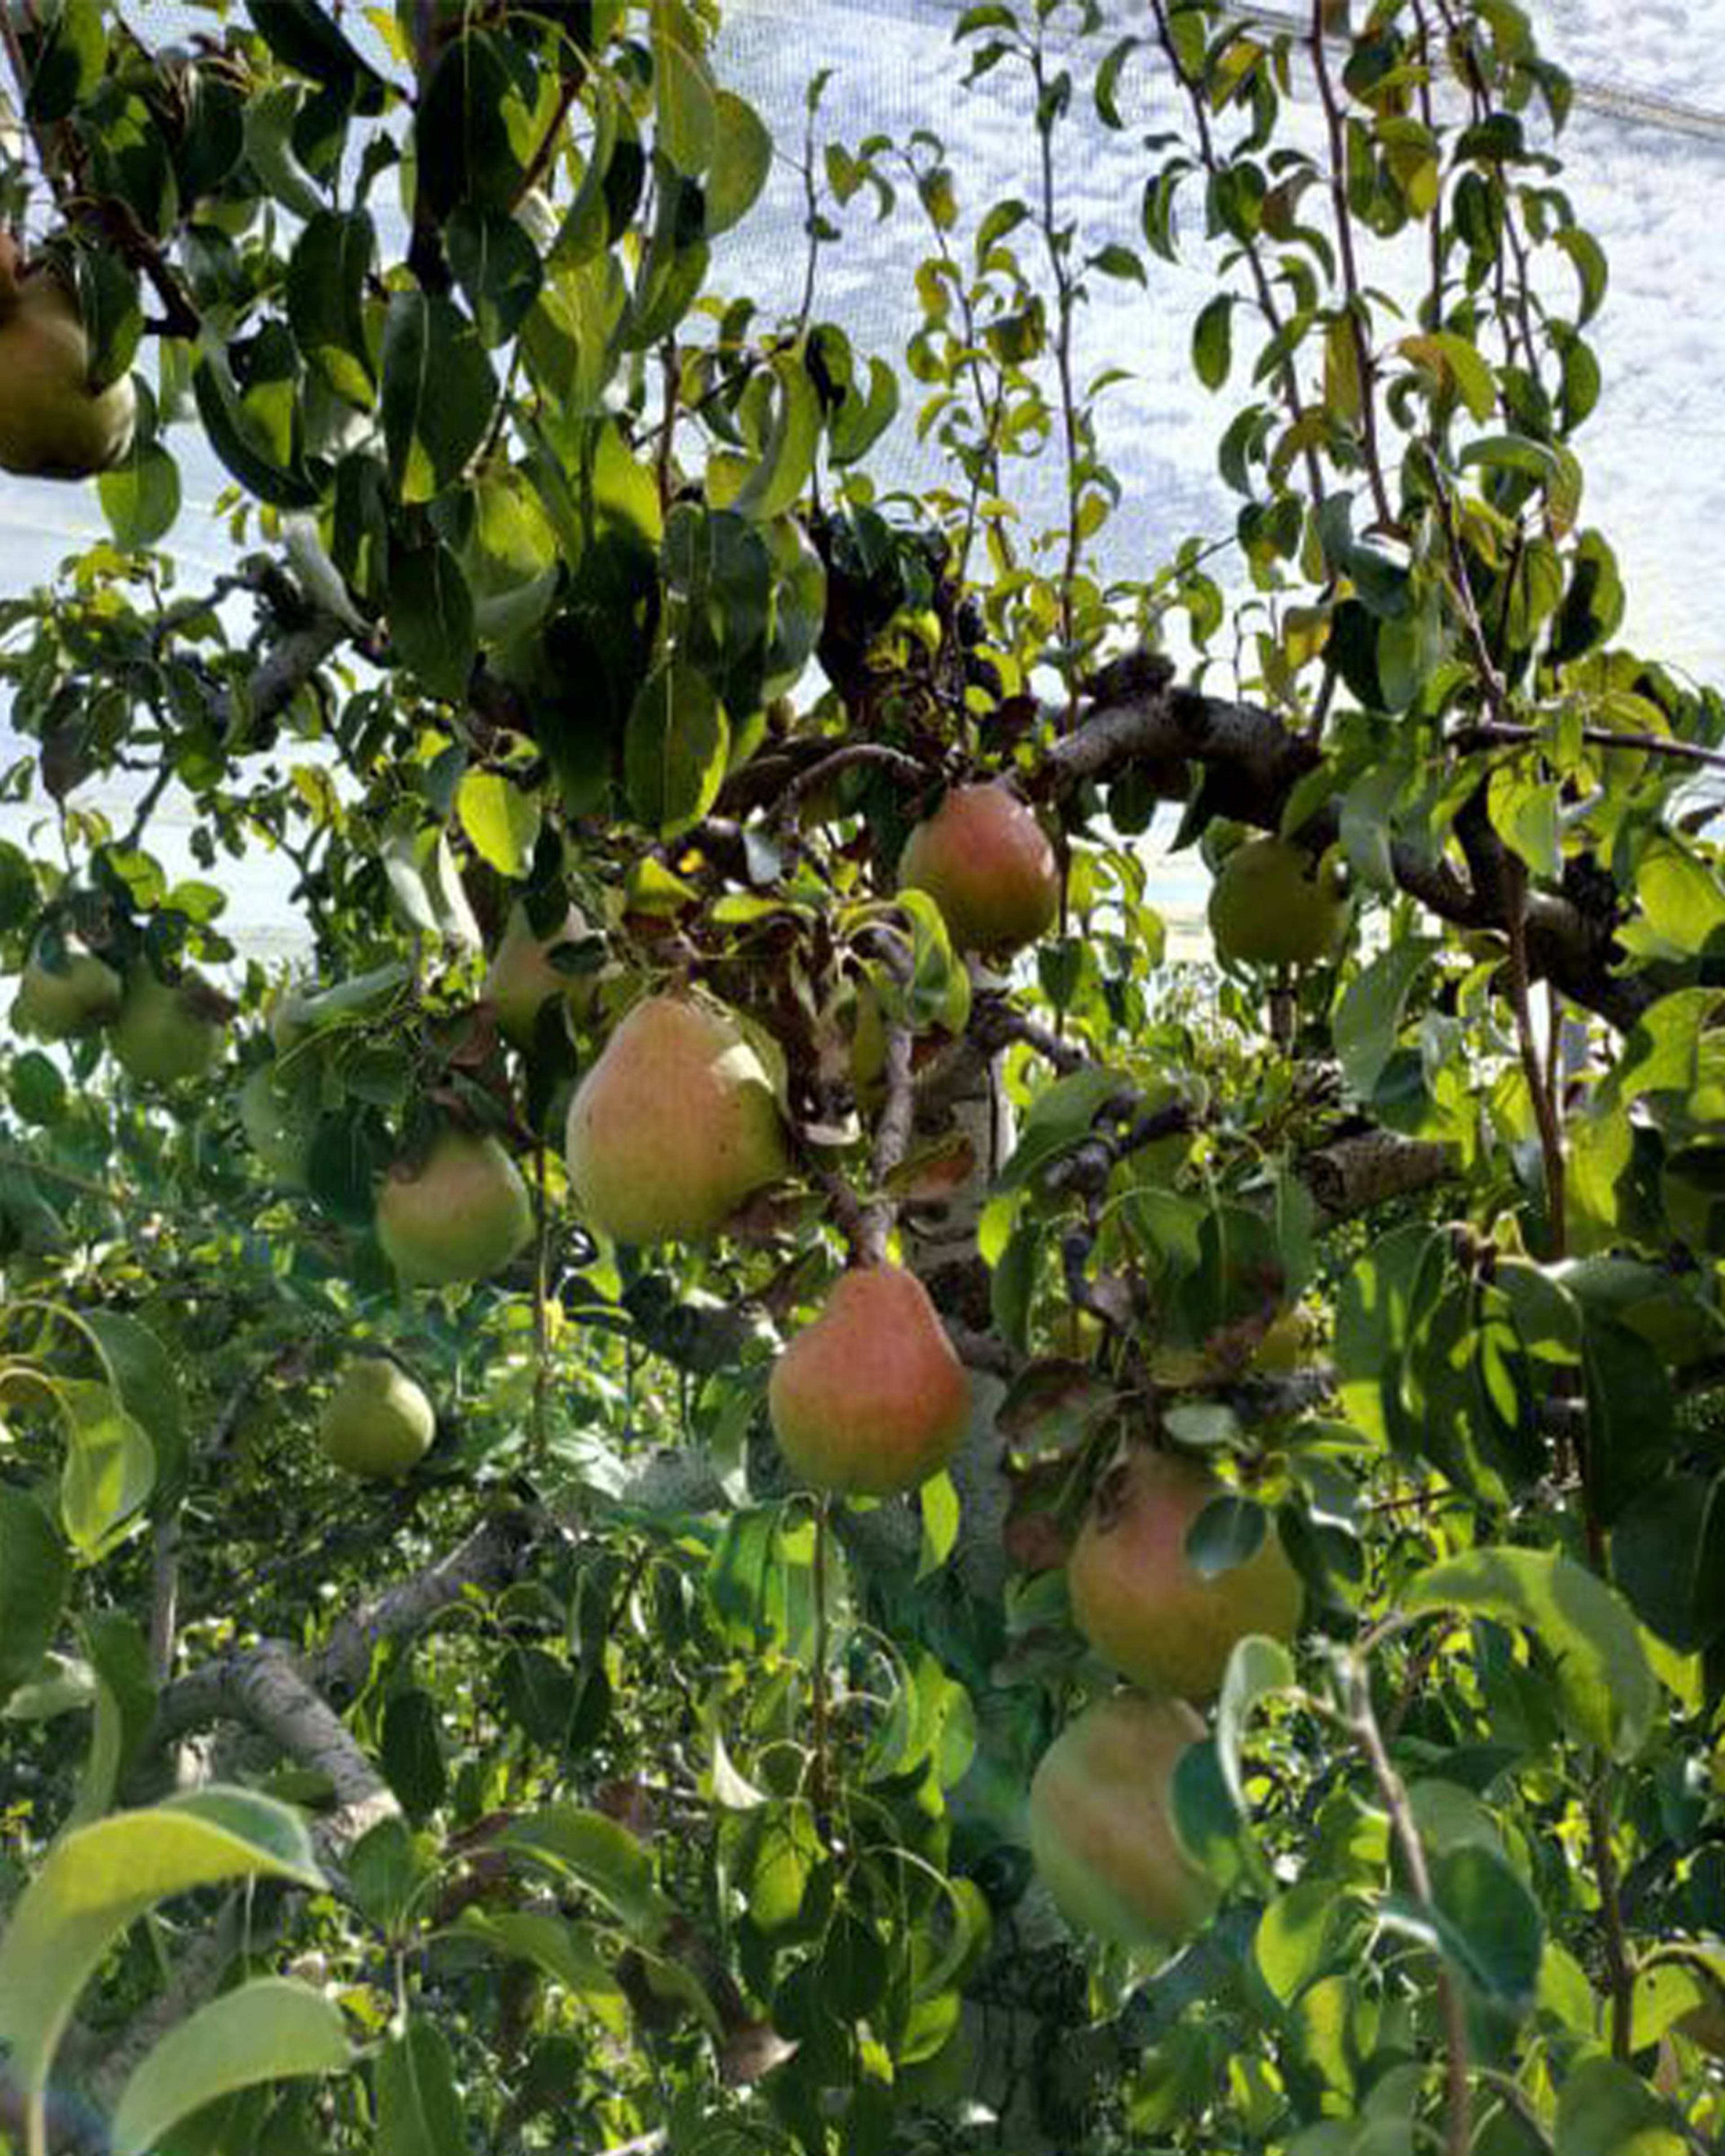 pears growing on the tree